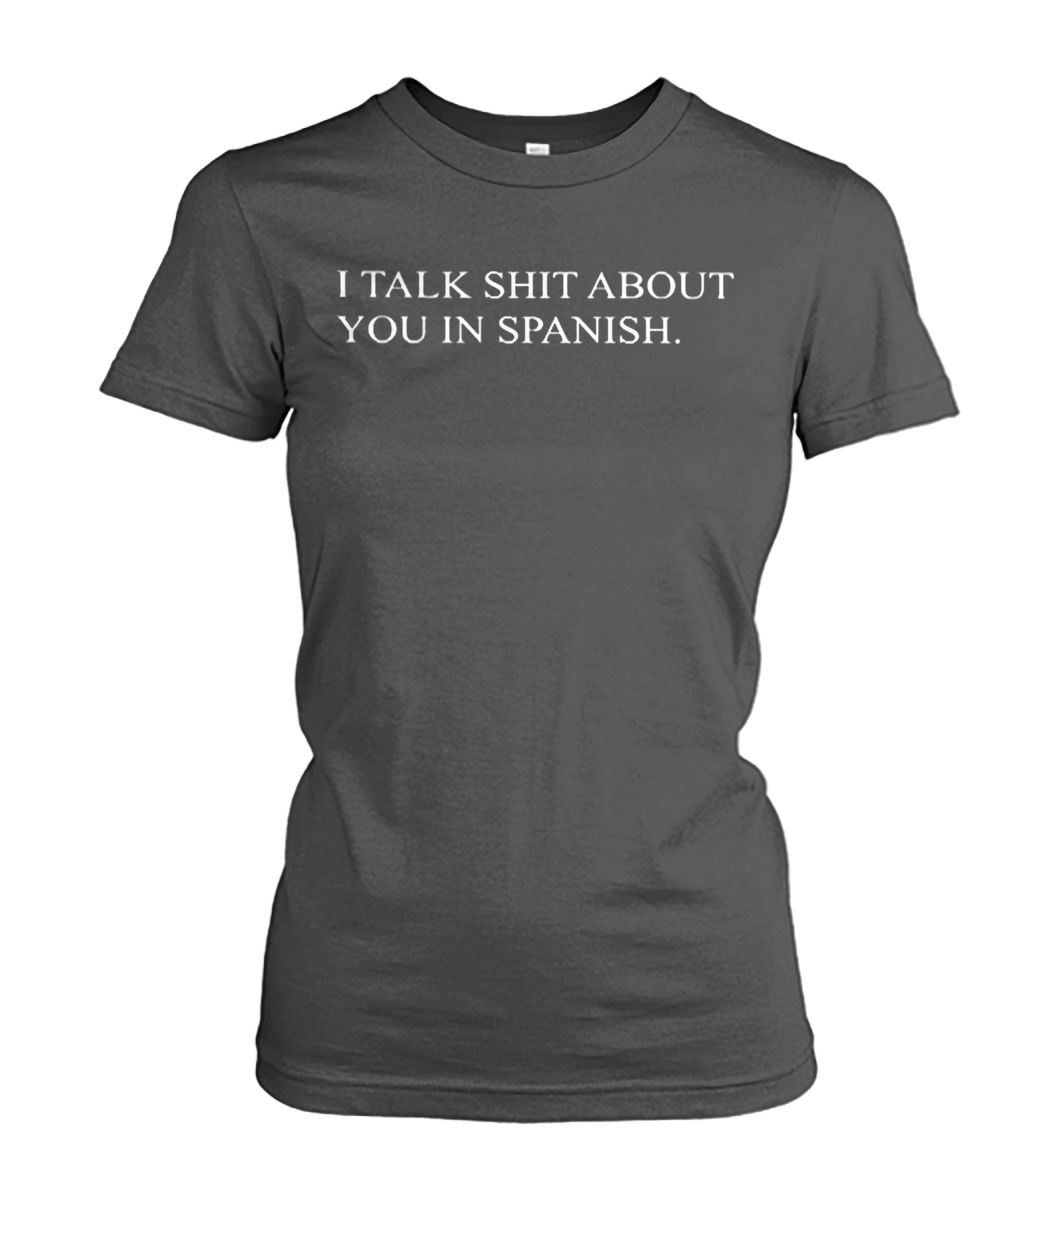 I talk shit about you in spanish women's crew tee